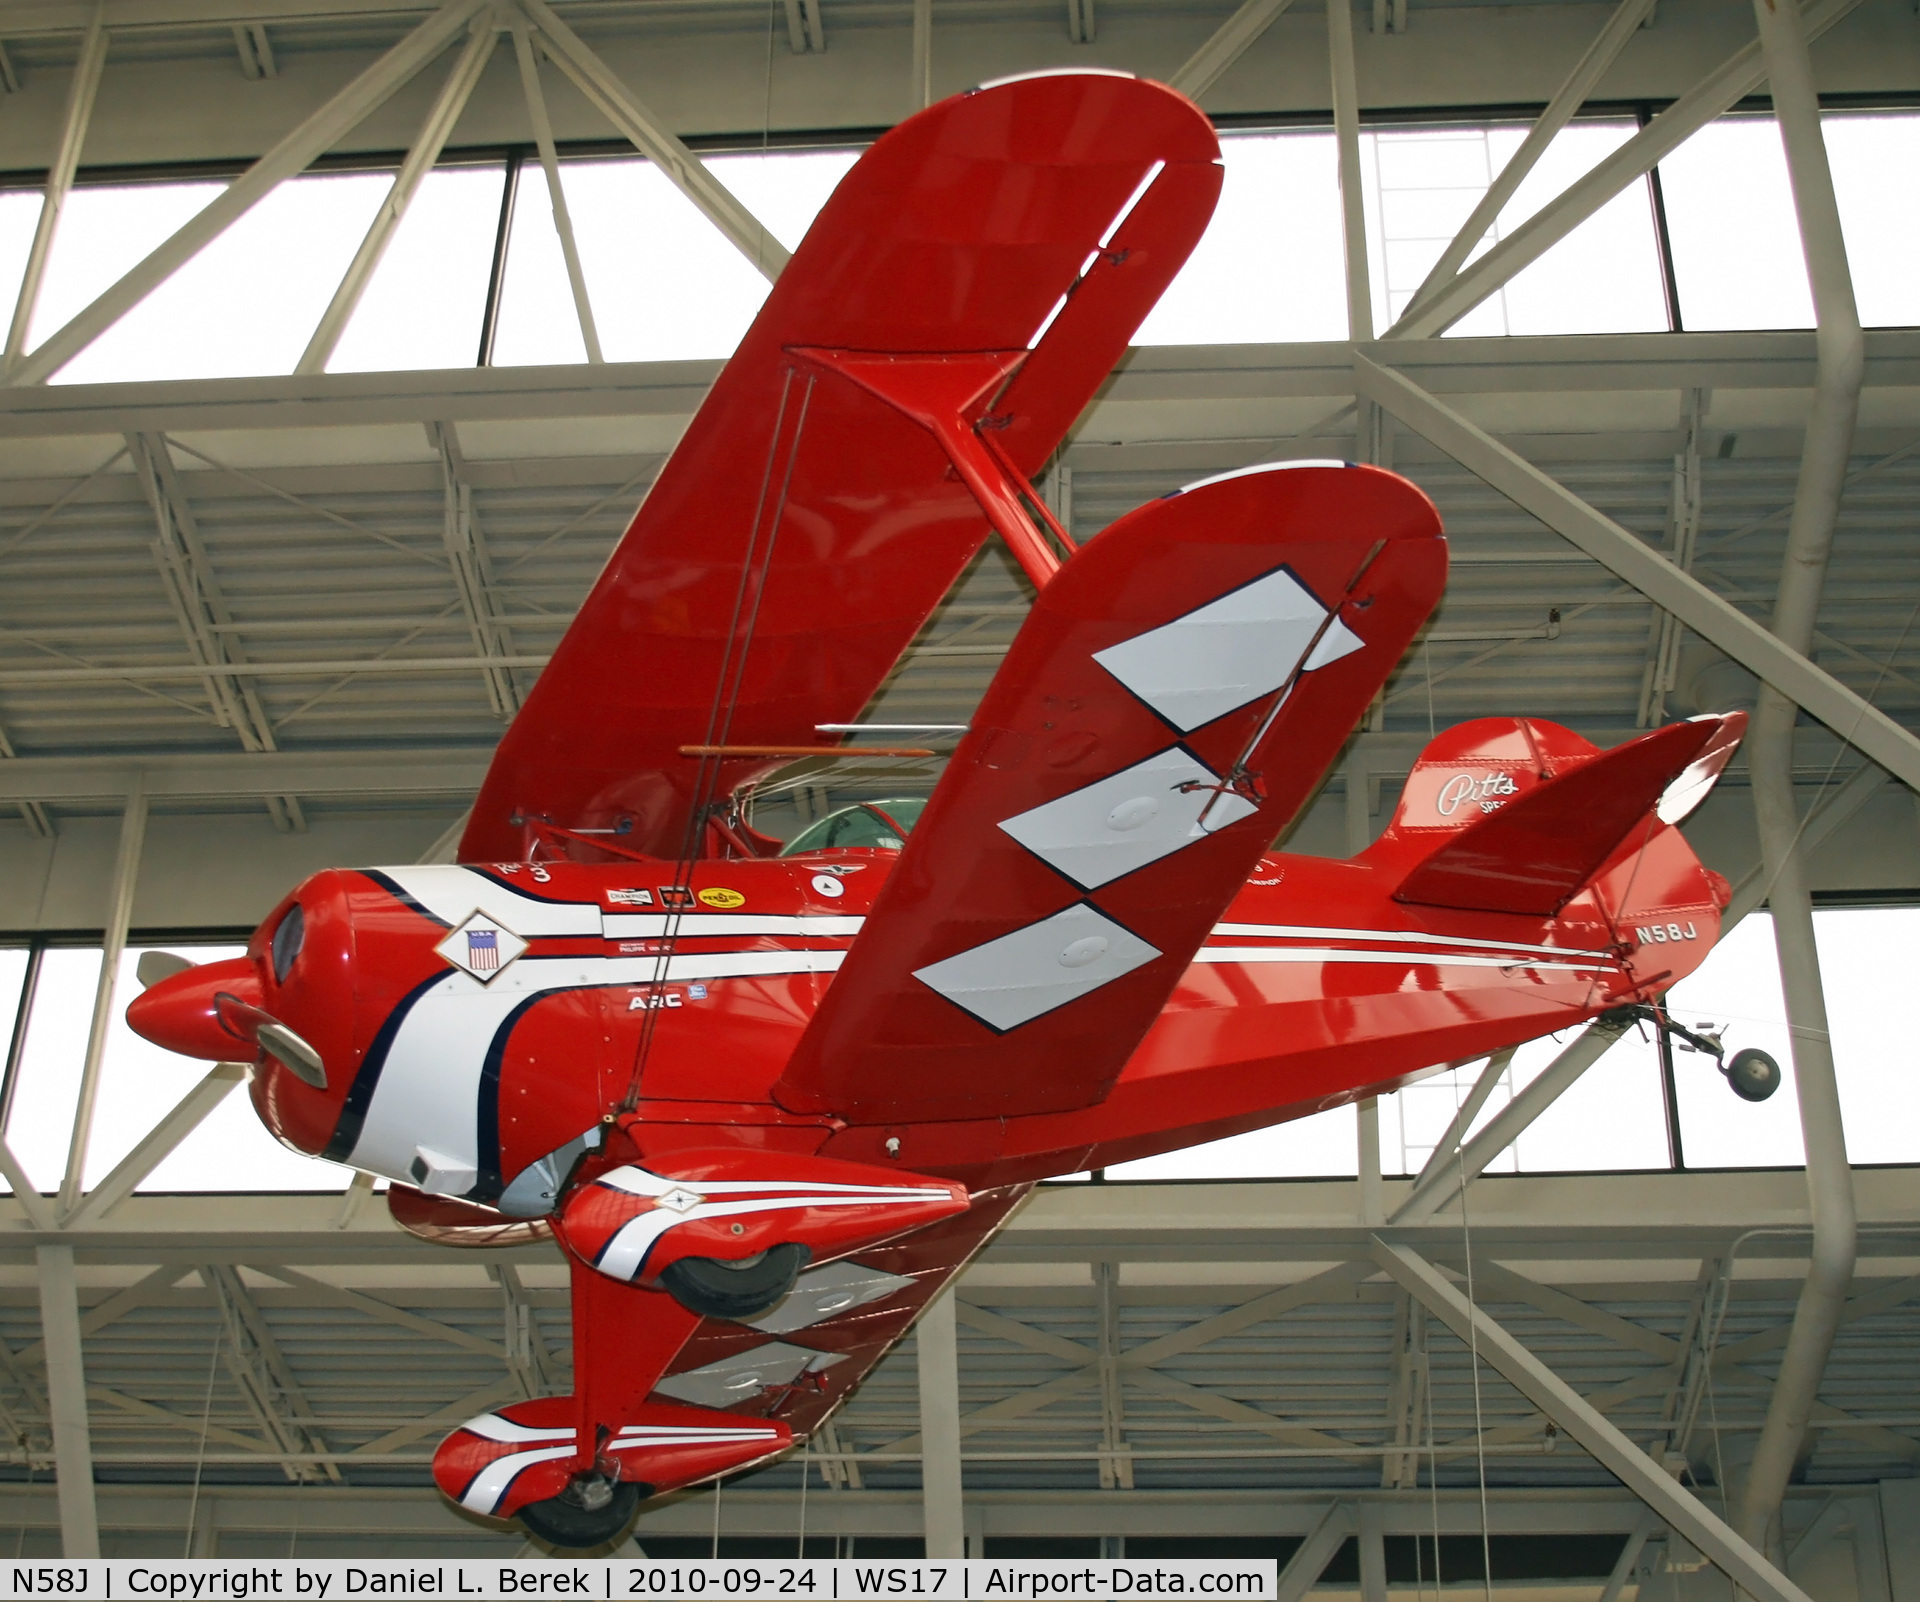 N58J, 1971 Pitts P-7 C/N 107, Formerly of the Red Devils, this Pitts special now adorns the foyer of the EAA AirVenture Museum.